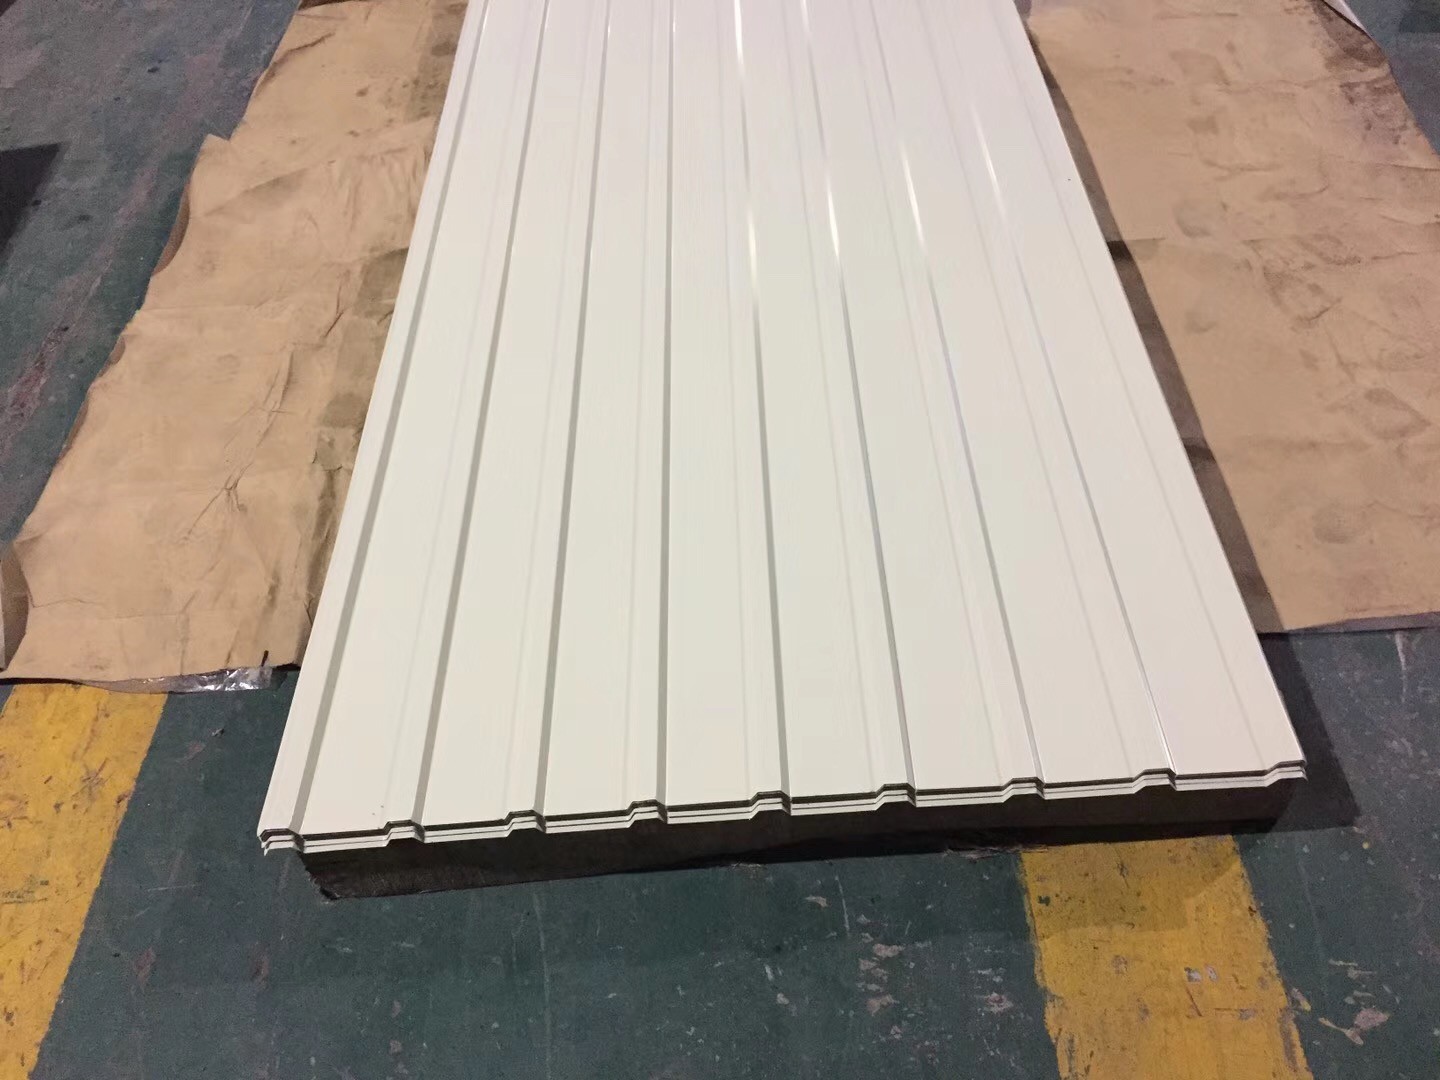 26 Gauge Thick Prepainted Aluminum Used For Roofing Corrugated Sheet